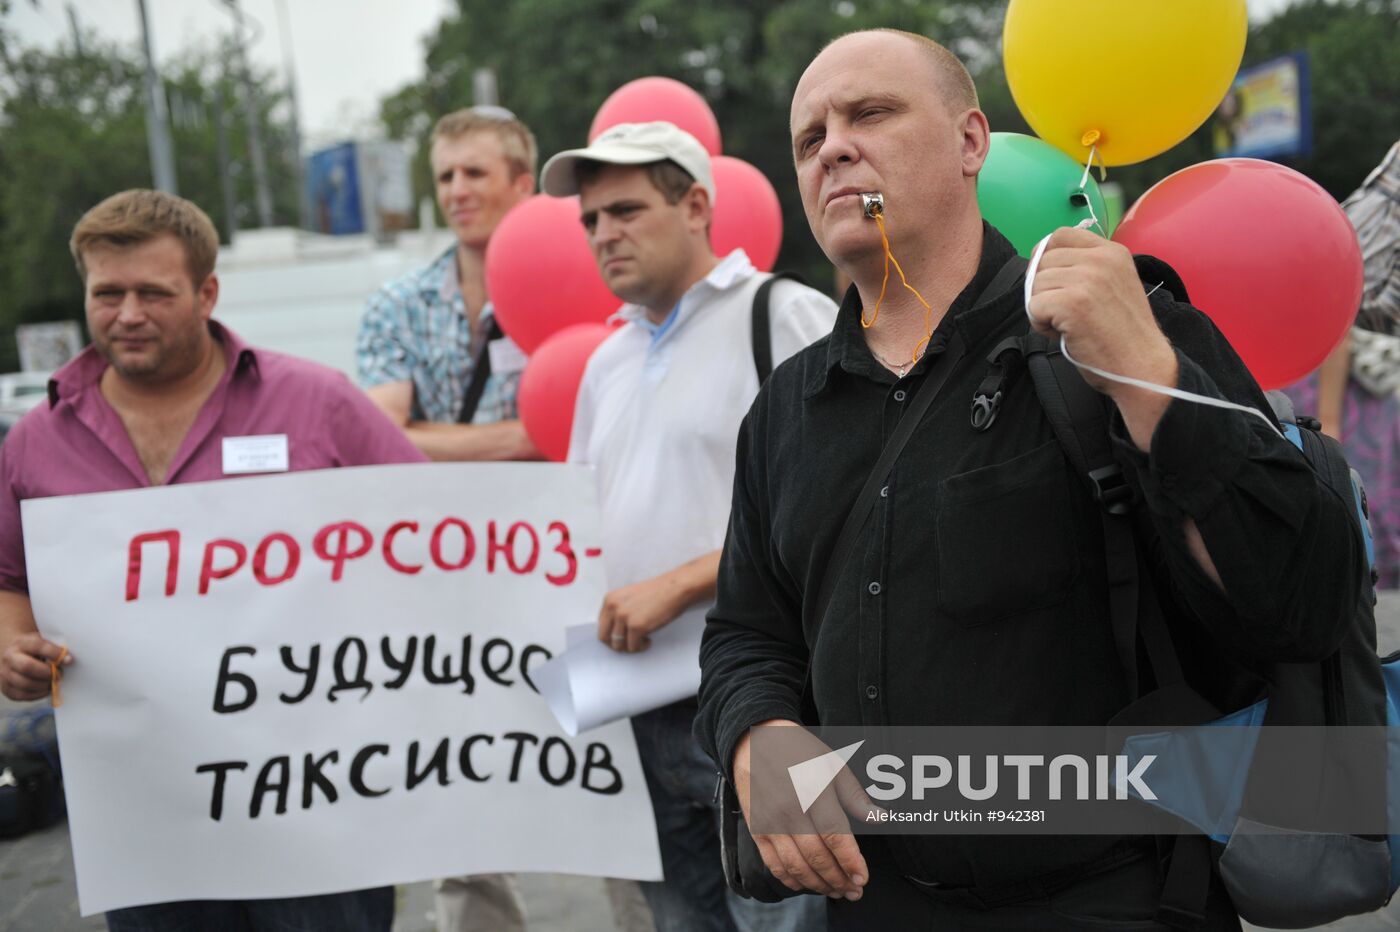 Moscow taxi drivers stage protest action